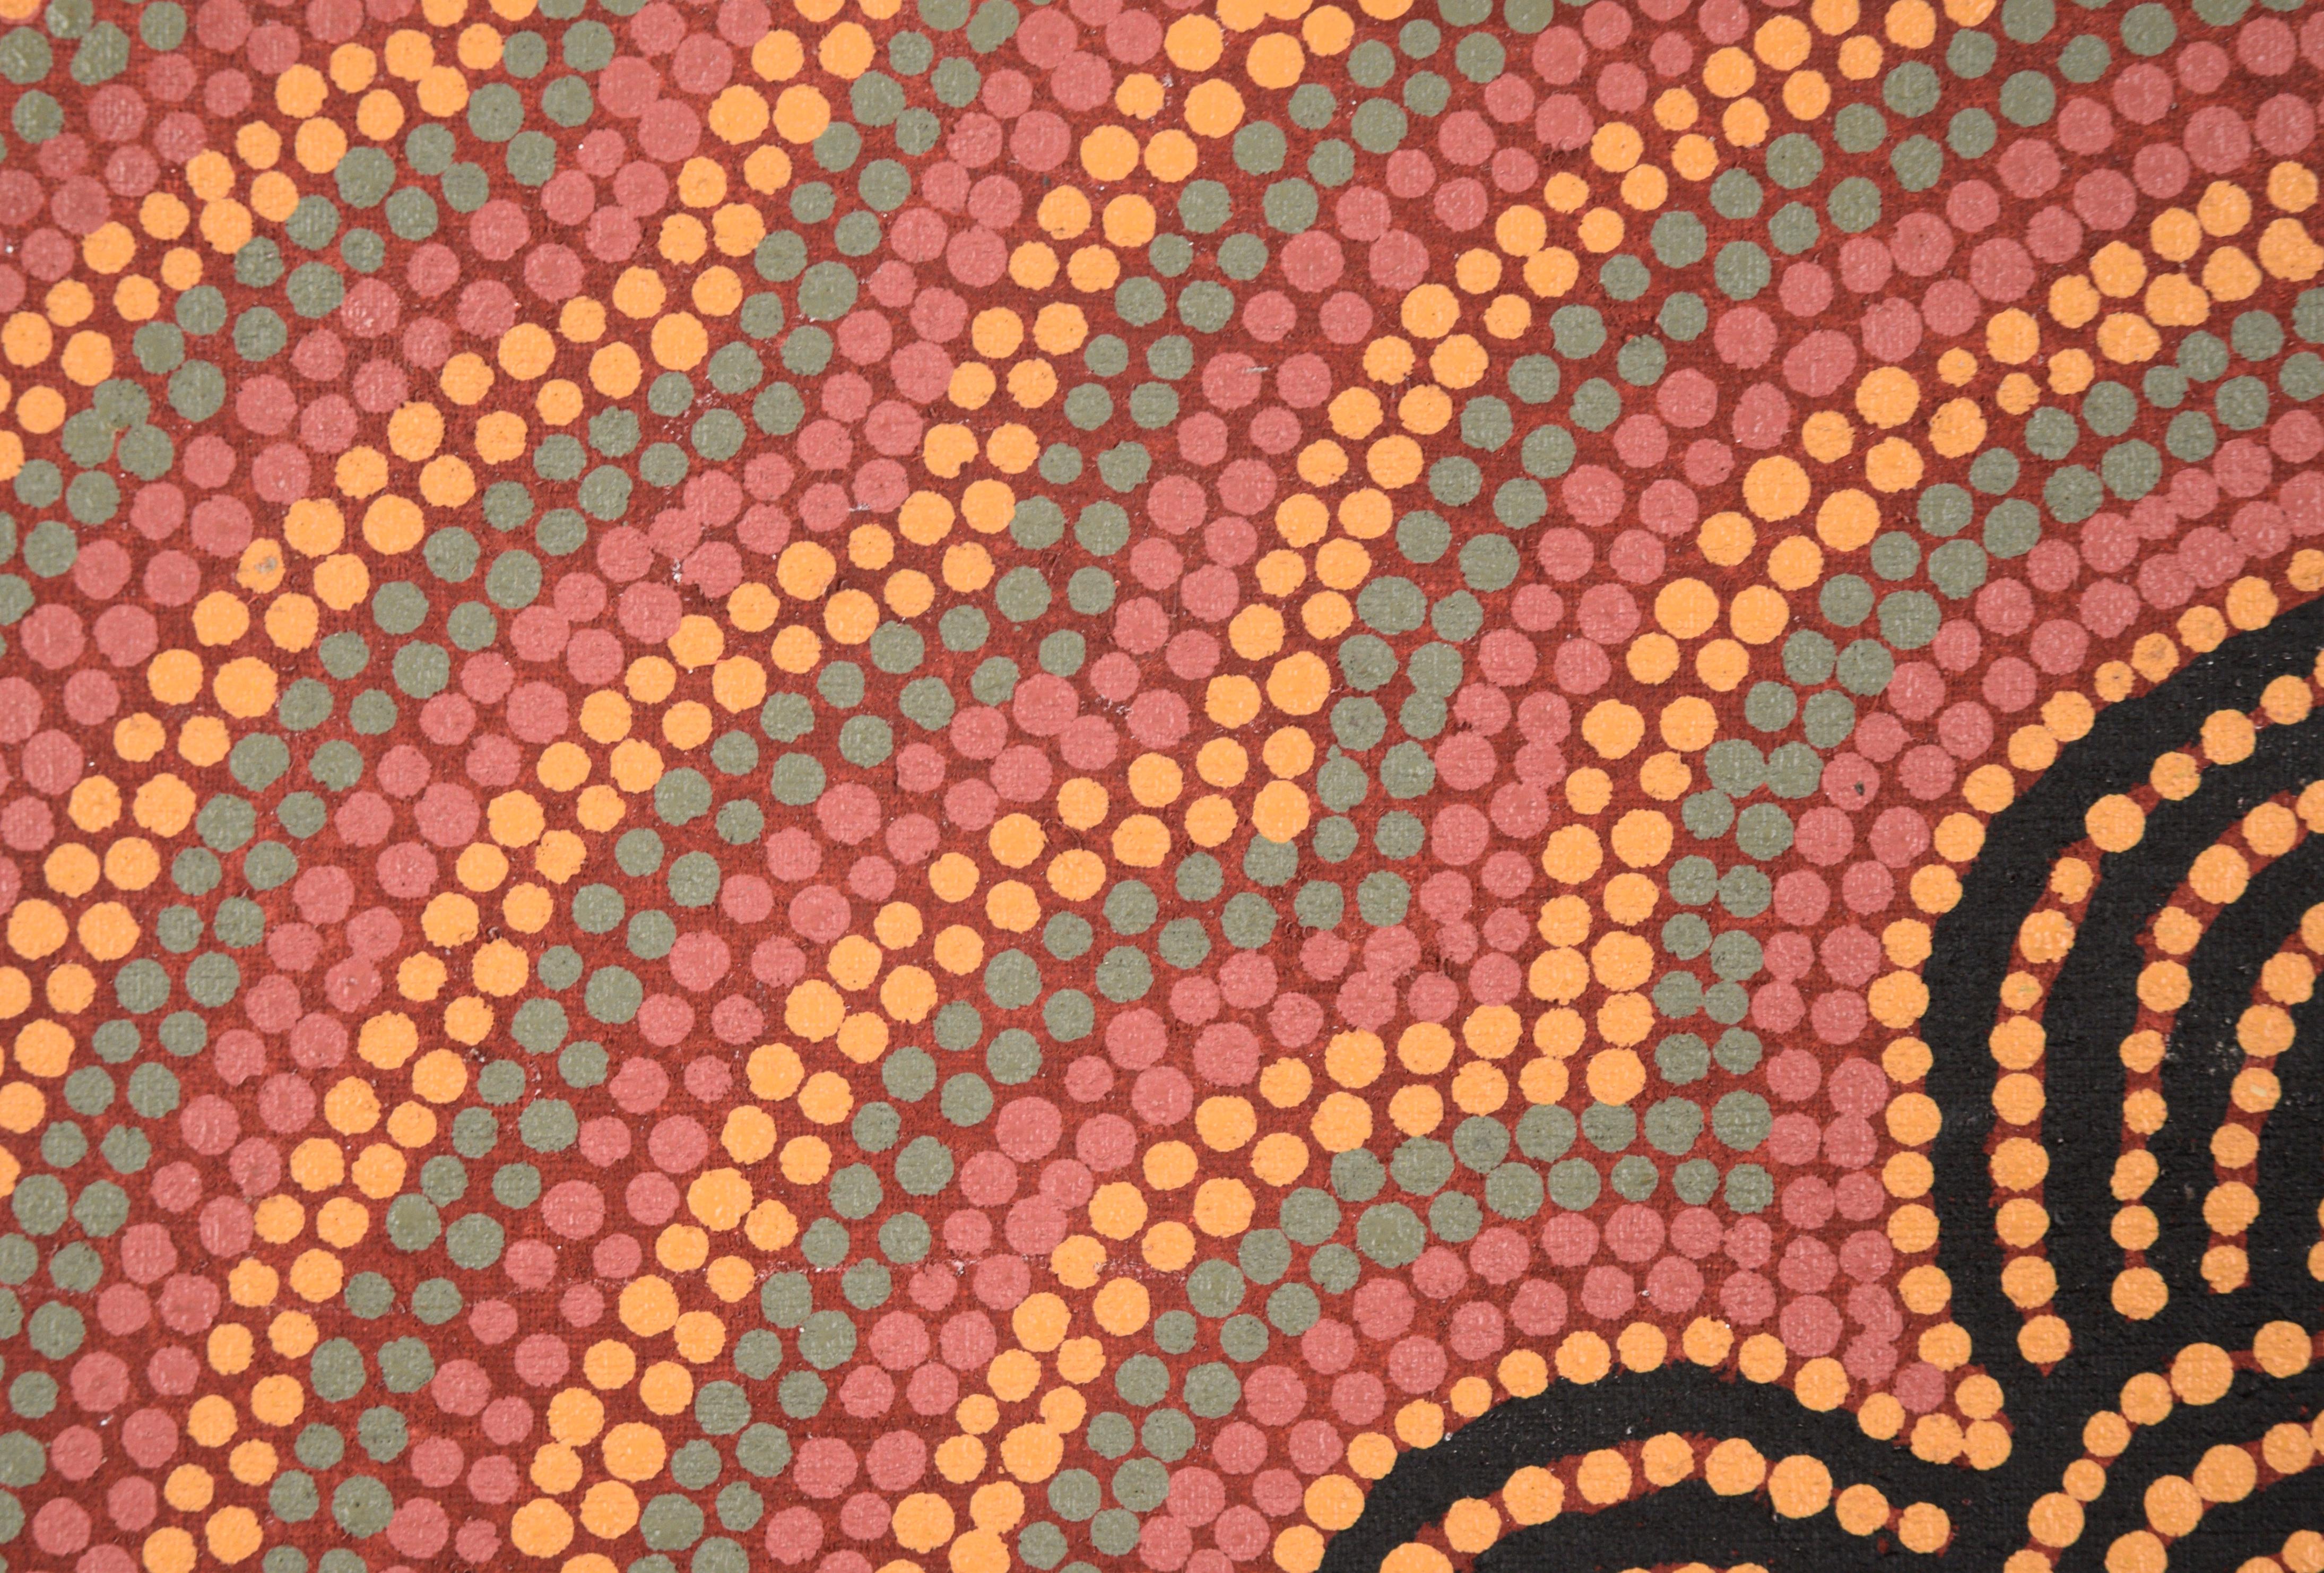 Untitled (Orange, Pink, and Green Dots on a Red Field) - Painting by Charlie Tjapangati